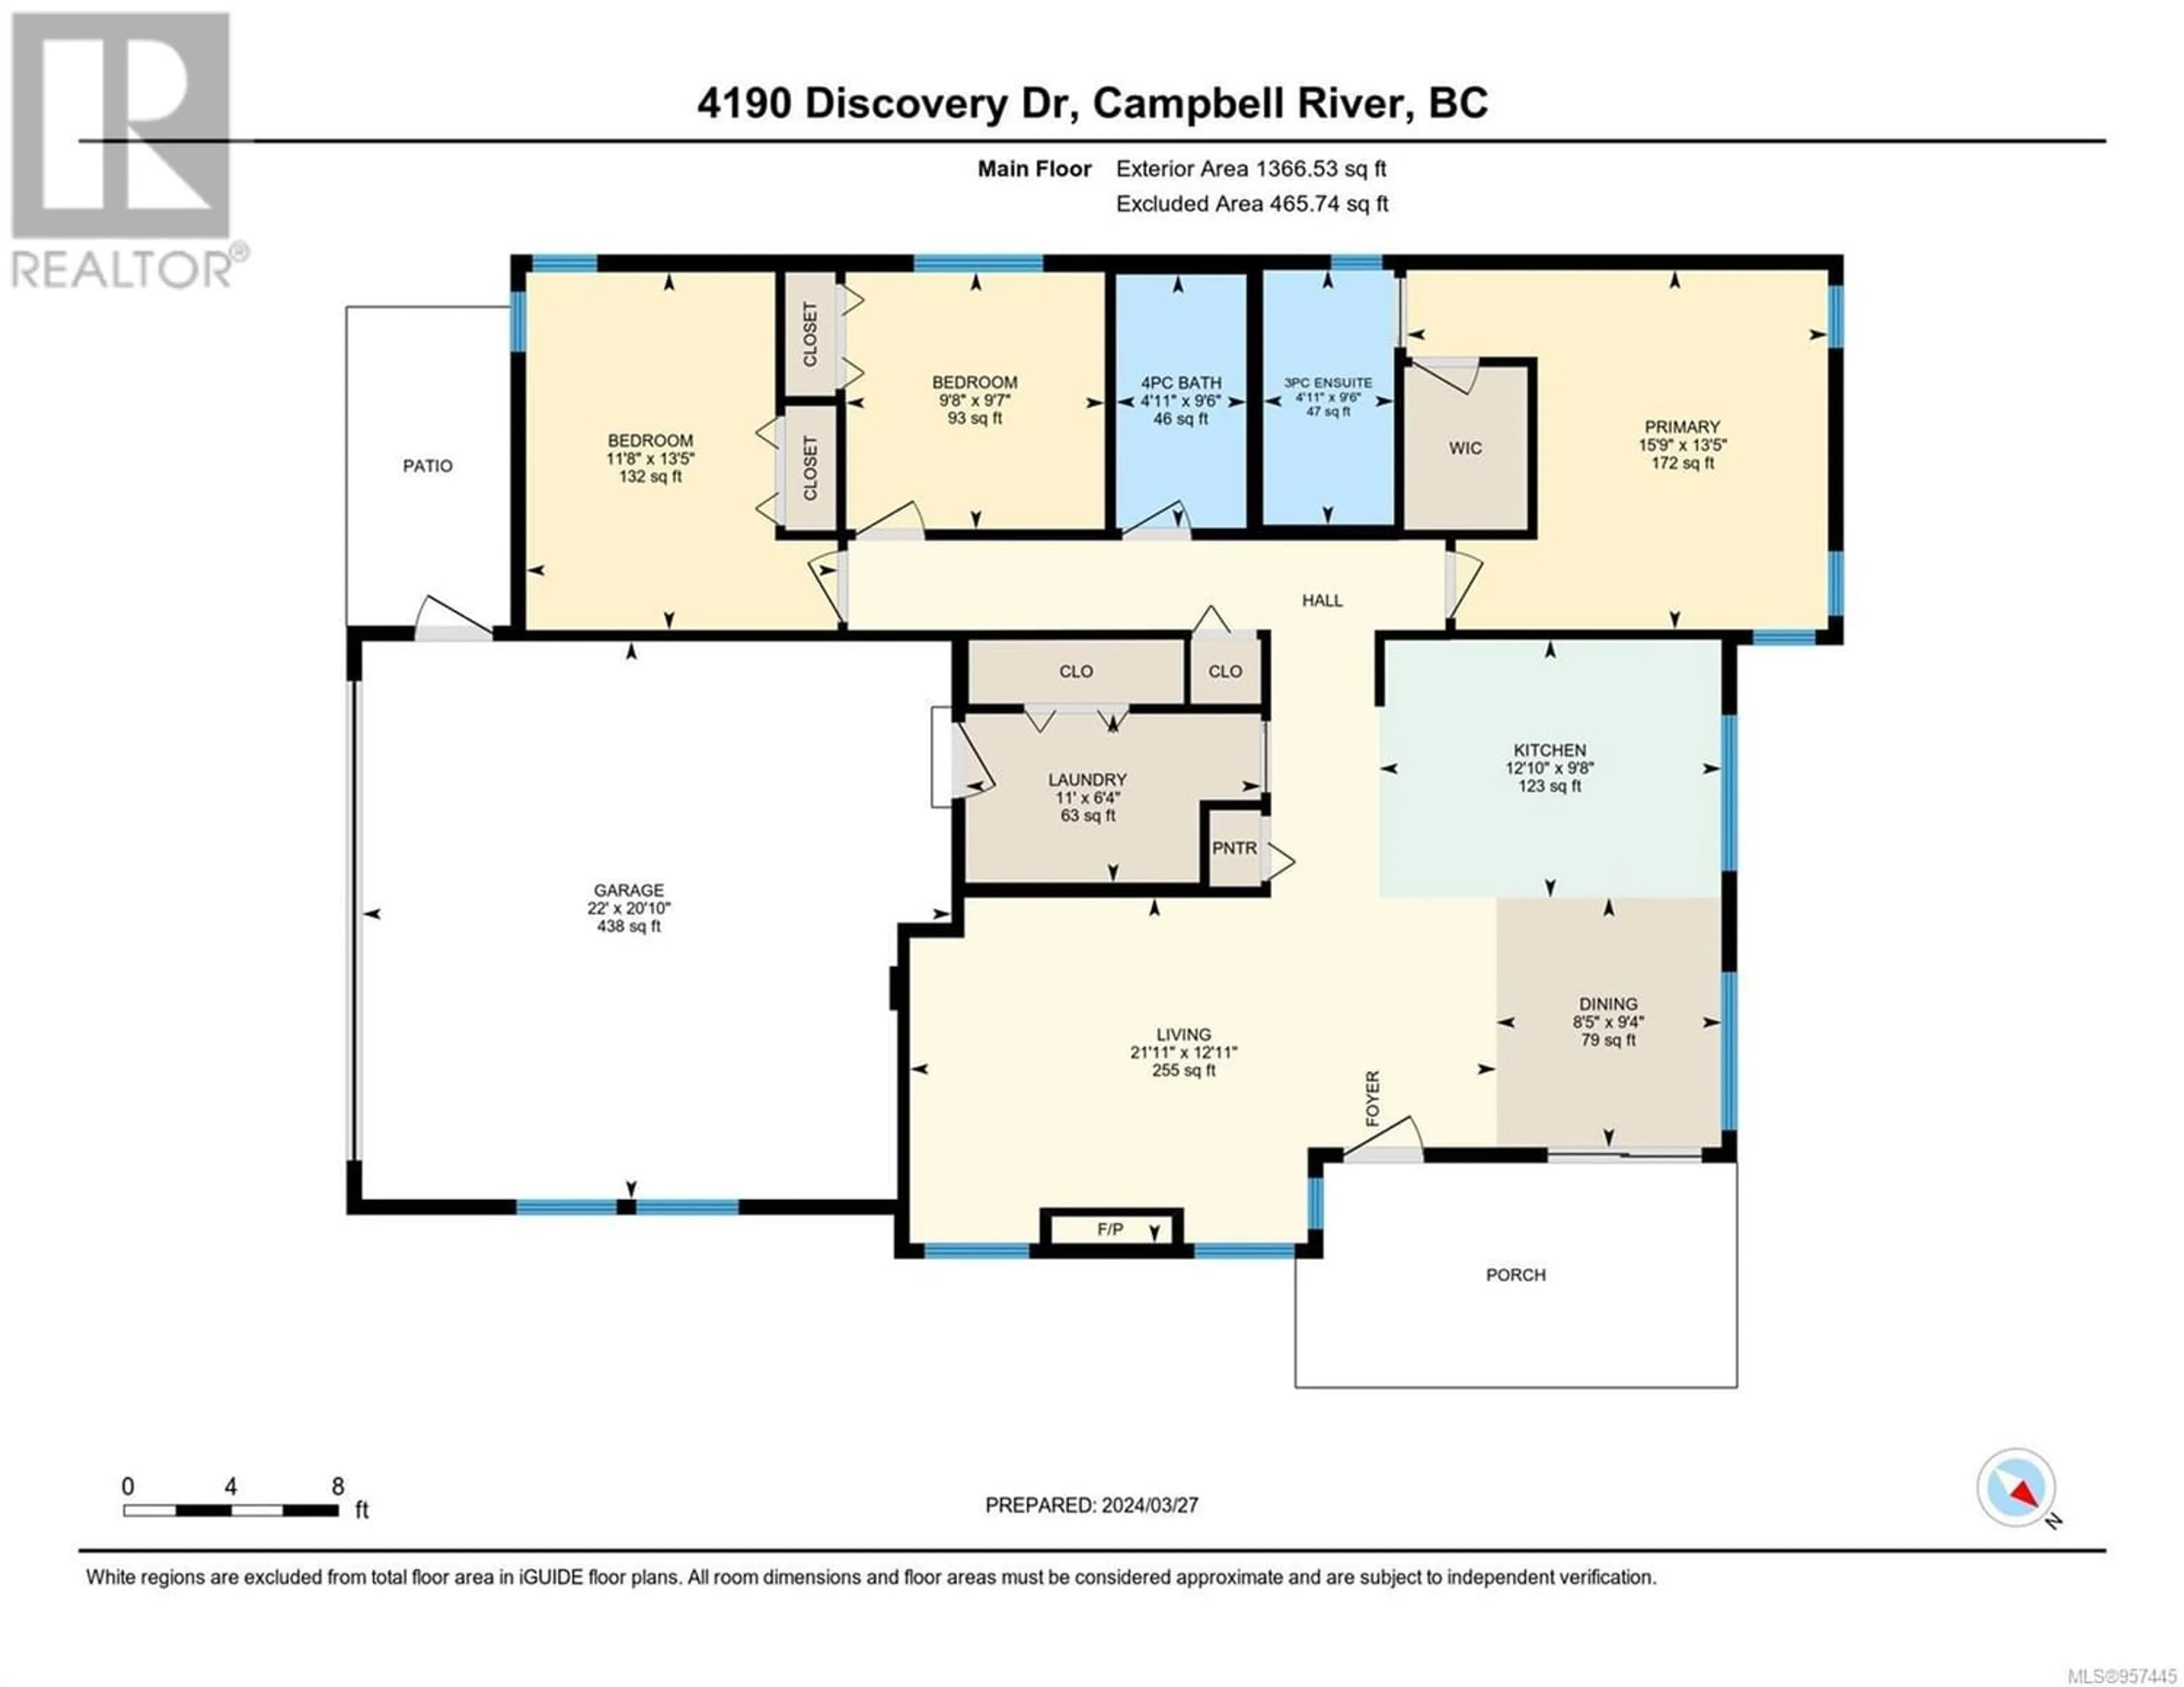 Floor plan for 4190 Discovery Dr, Campbell River British Columbia V9W4X7